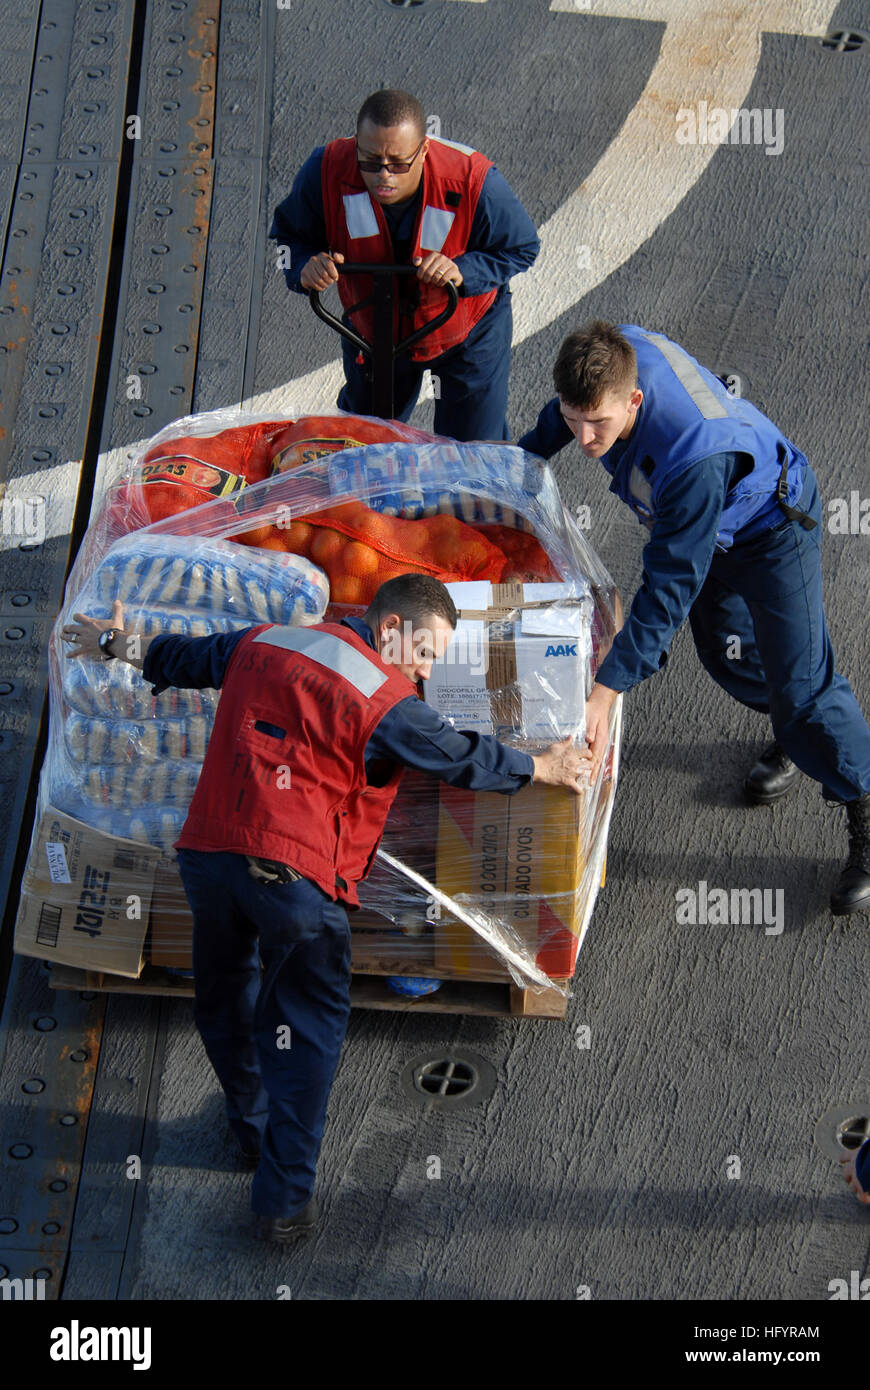 110510-N-ZI300-073 ATLANTIC OCEAN (May 10, 2011) Sailors aboard the guided-missile frigate USS Boone (FFG 28) move a pallet of supplies in preparation of a vertical replenishment with the guided-missile frigate USS Thach (FFG 43). Boone is deployed to South America to participate in Southern Seas 2011. (U.S. Navy photo by Mass Communication Specialist 1st Class Steve Smith/Released) US Navy 110510-N-ZI300-073 Sailors aboard USS Boone (FFG 28) move a pallet of supplies in preparation of a vertical replenishment with USS Thach (F Stock Photo